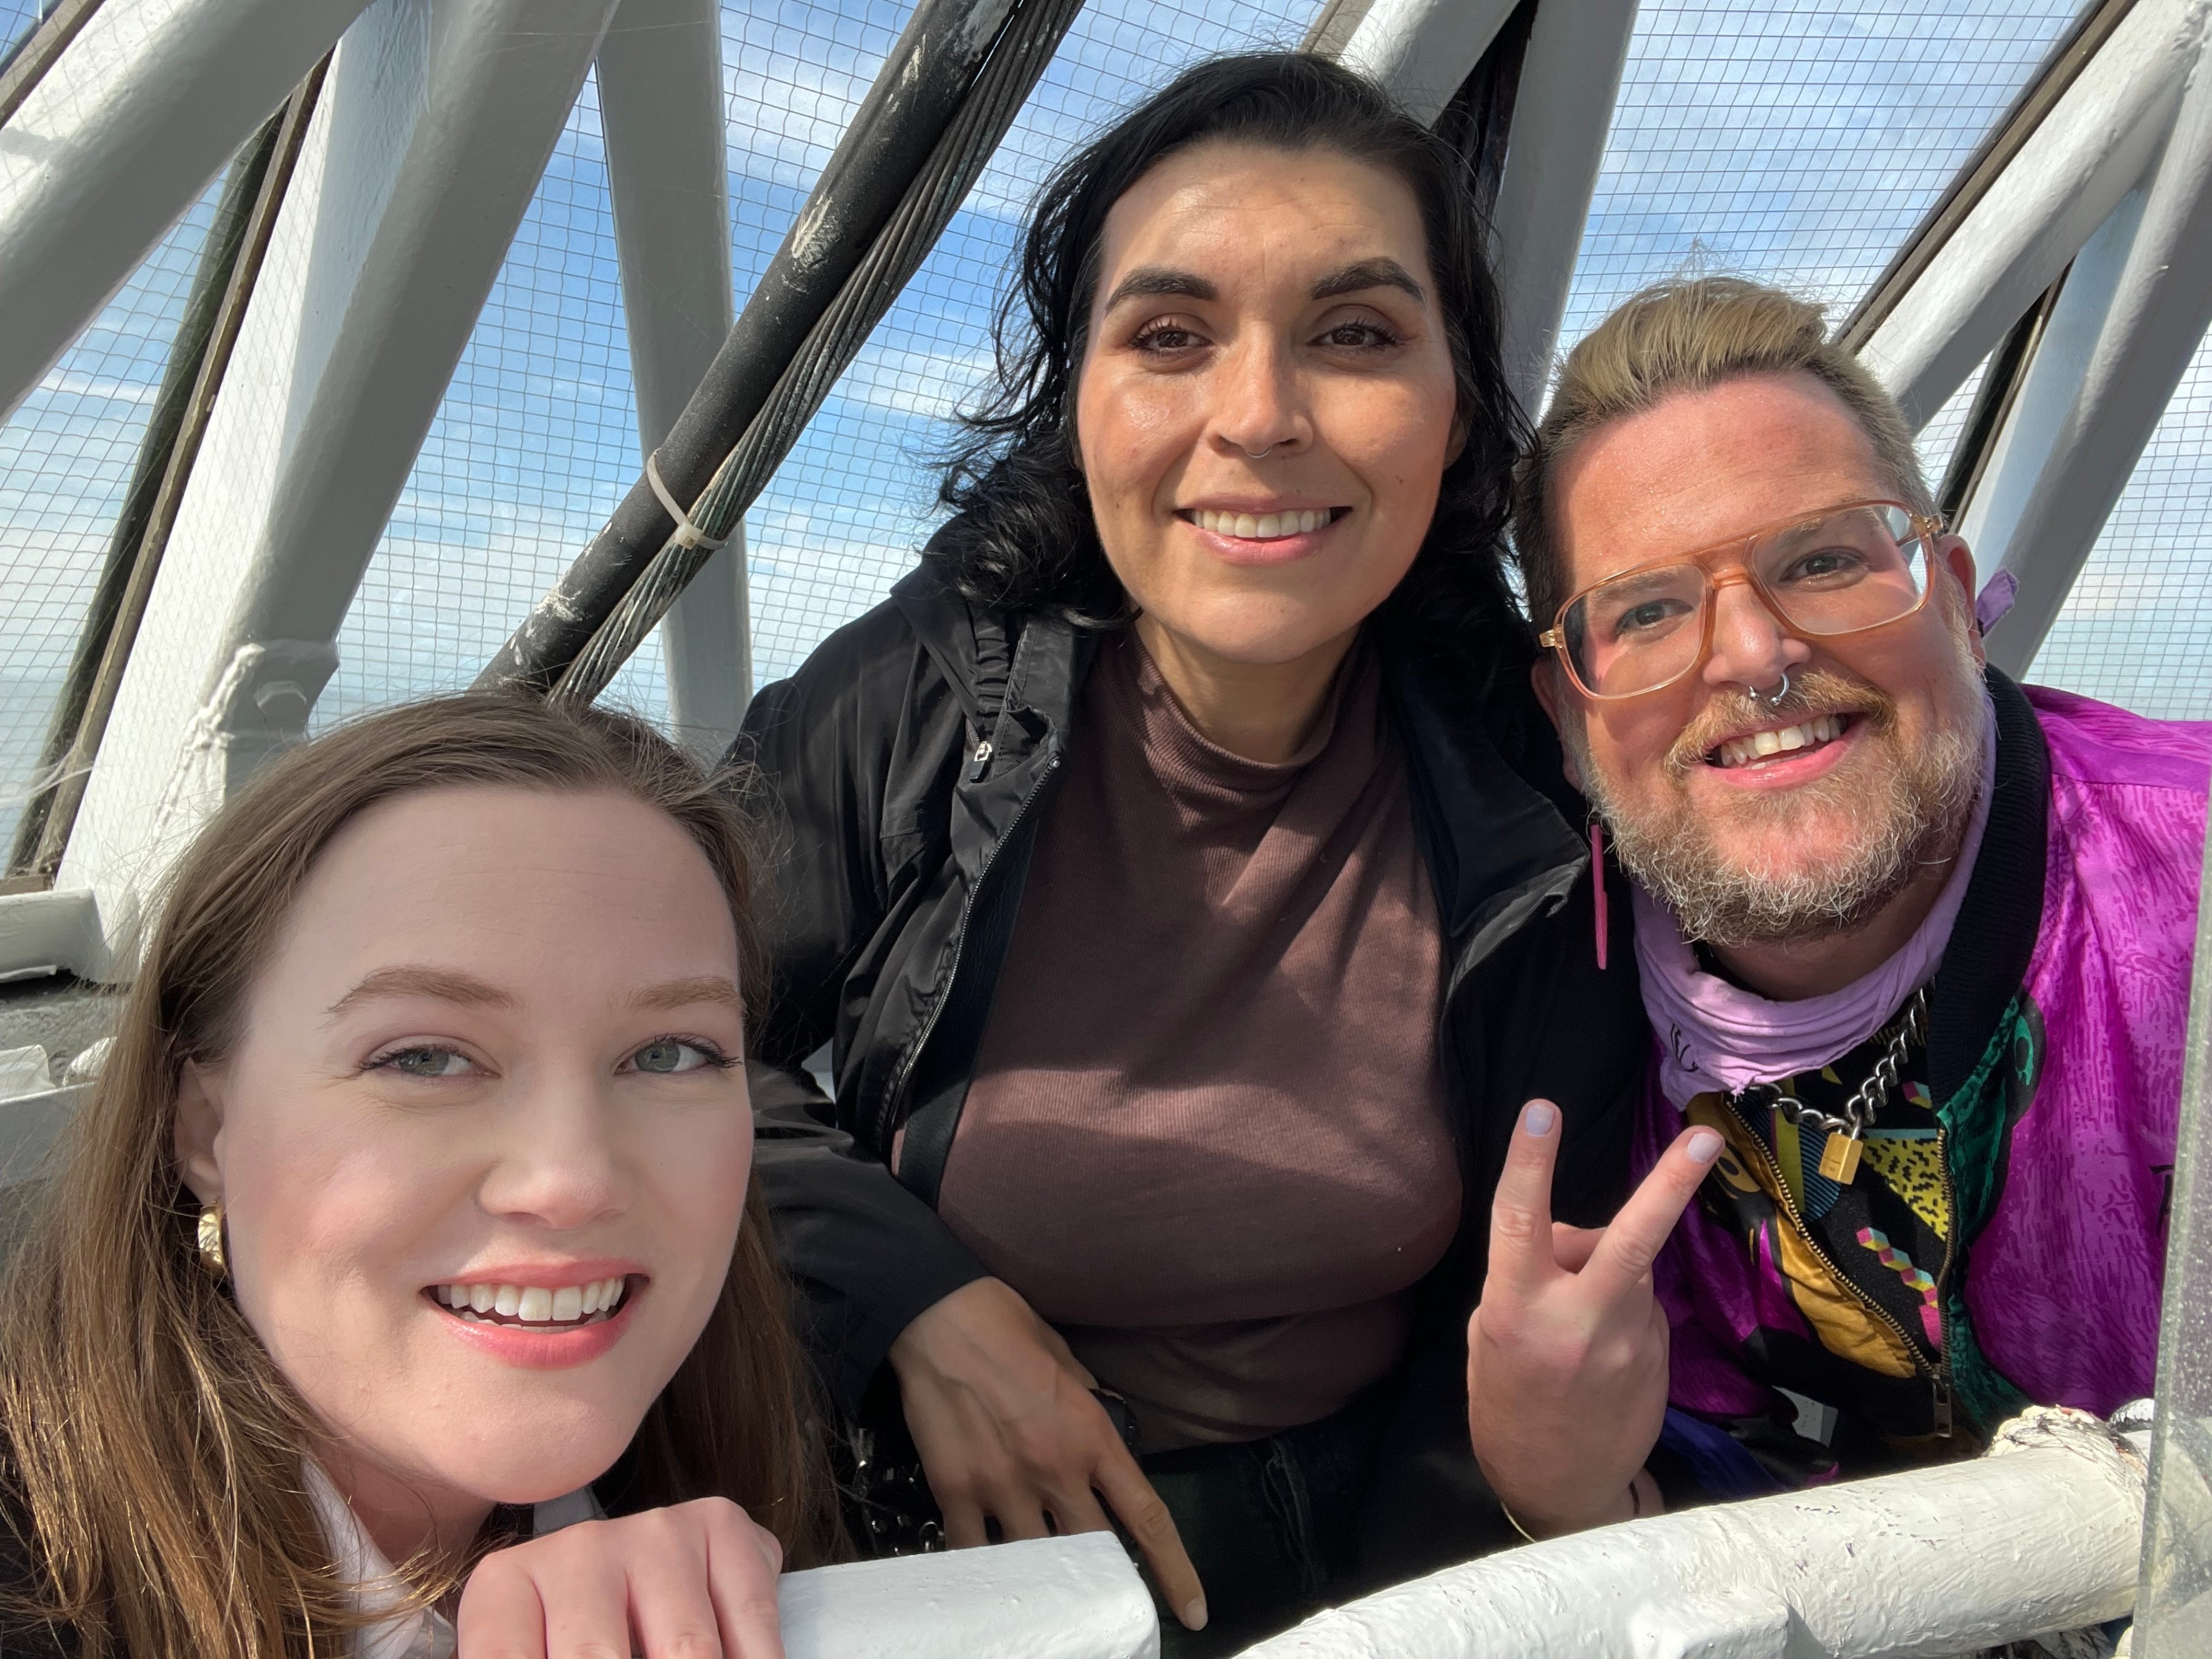 Three smiling people are taking a selfie, with metal beams and netting in the background, suggesting an outdoor setting.